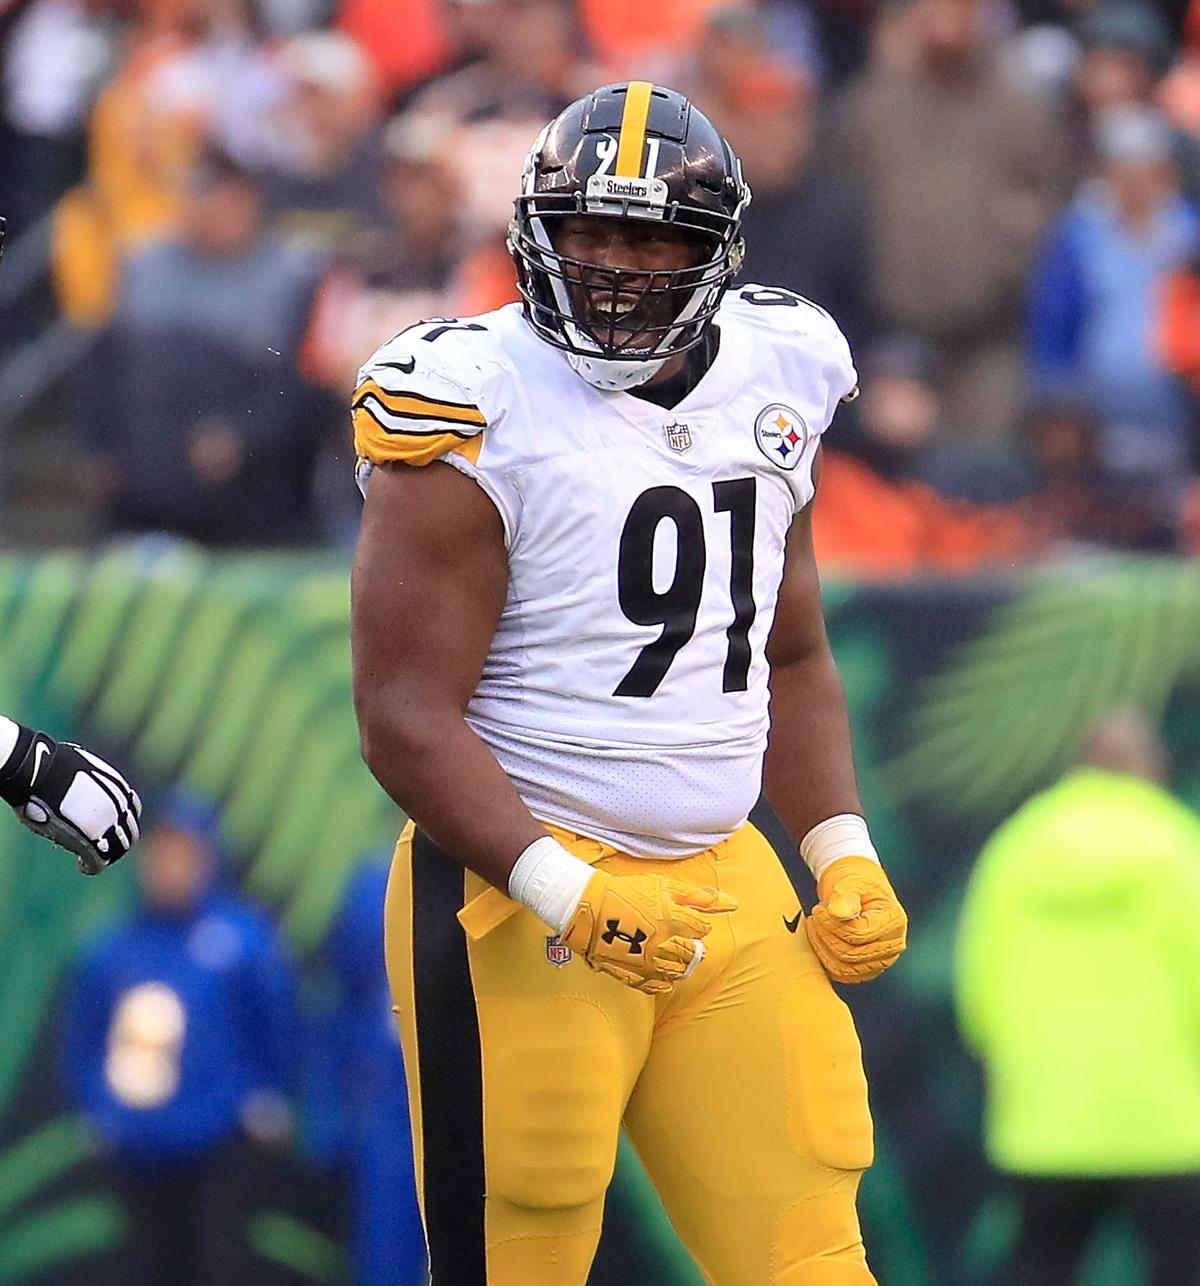 Stephon Tuitt of the Pittsburgh Steelers reacts after a defensive play during the fourth quarter of the game against the Cincinnati Bengals at Paul Brown Stadium on Oct. 14, 2018, in Cincinnati, Ohio. (Andy Lyons/Getty Images)